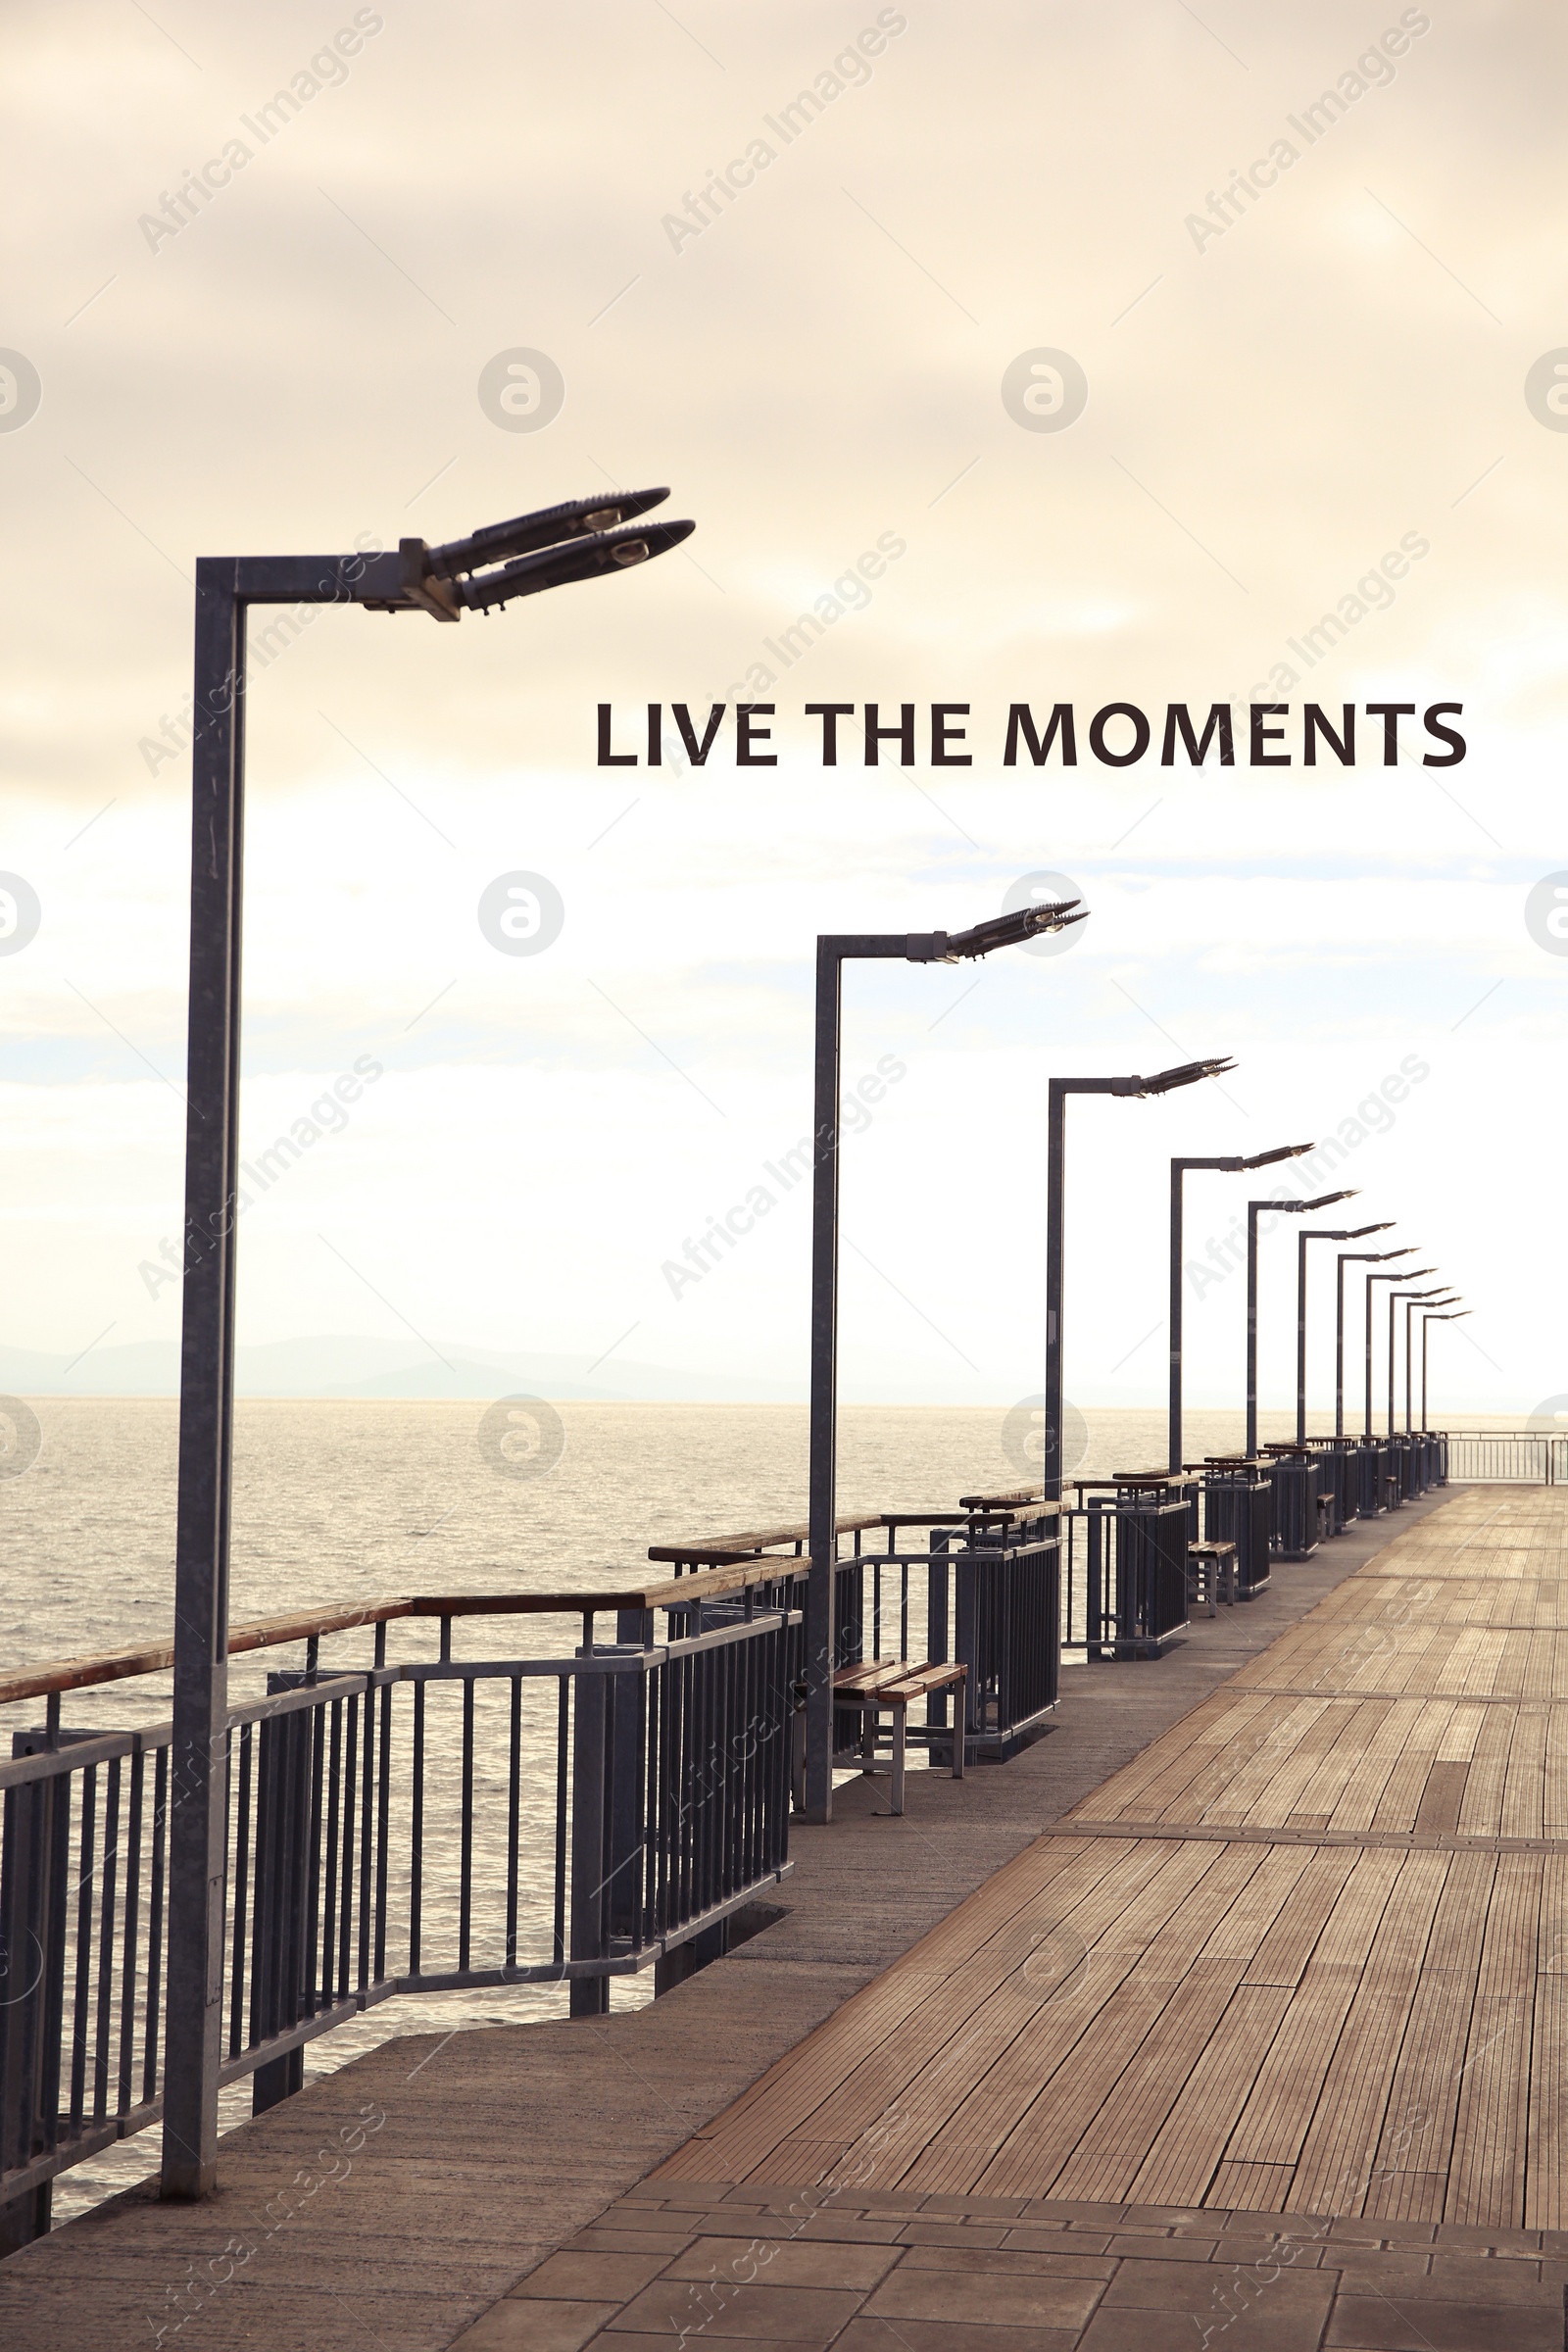 Image of Live the moments, affirmation. Beautiful view of pier near sea outdoors